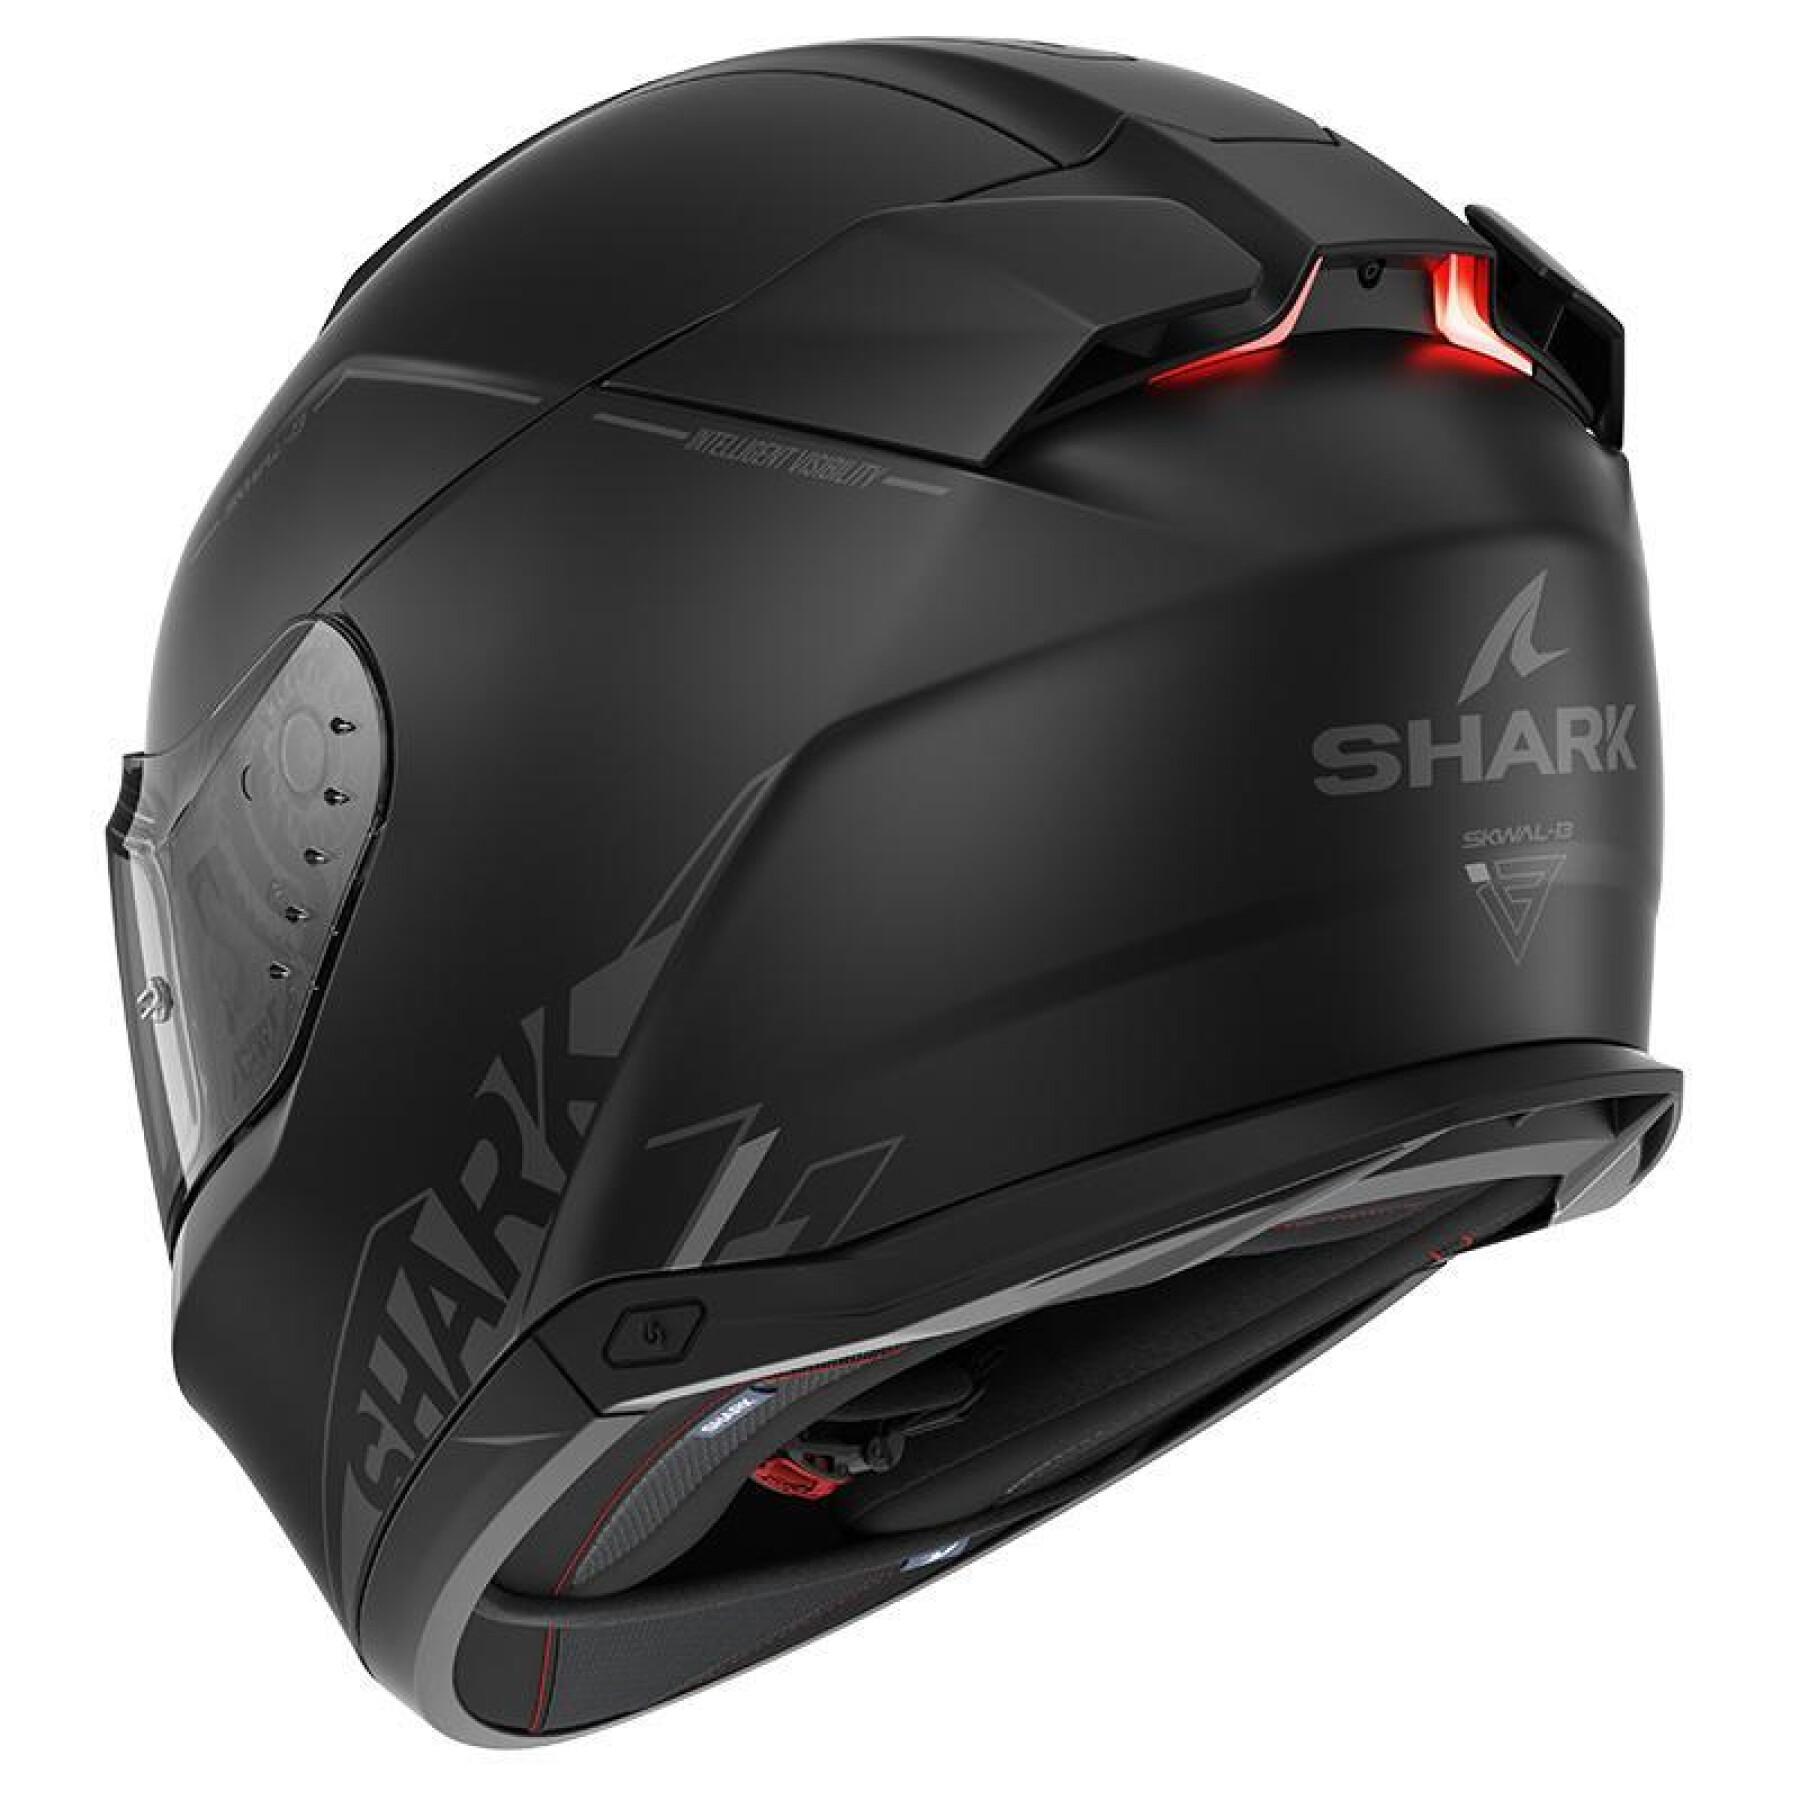 Capacete facial completo Shark Skwal i3 Blank SP